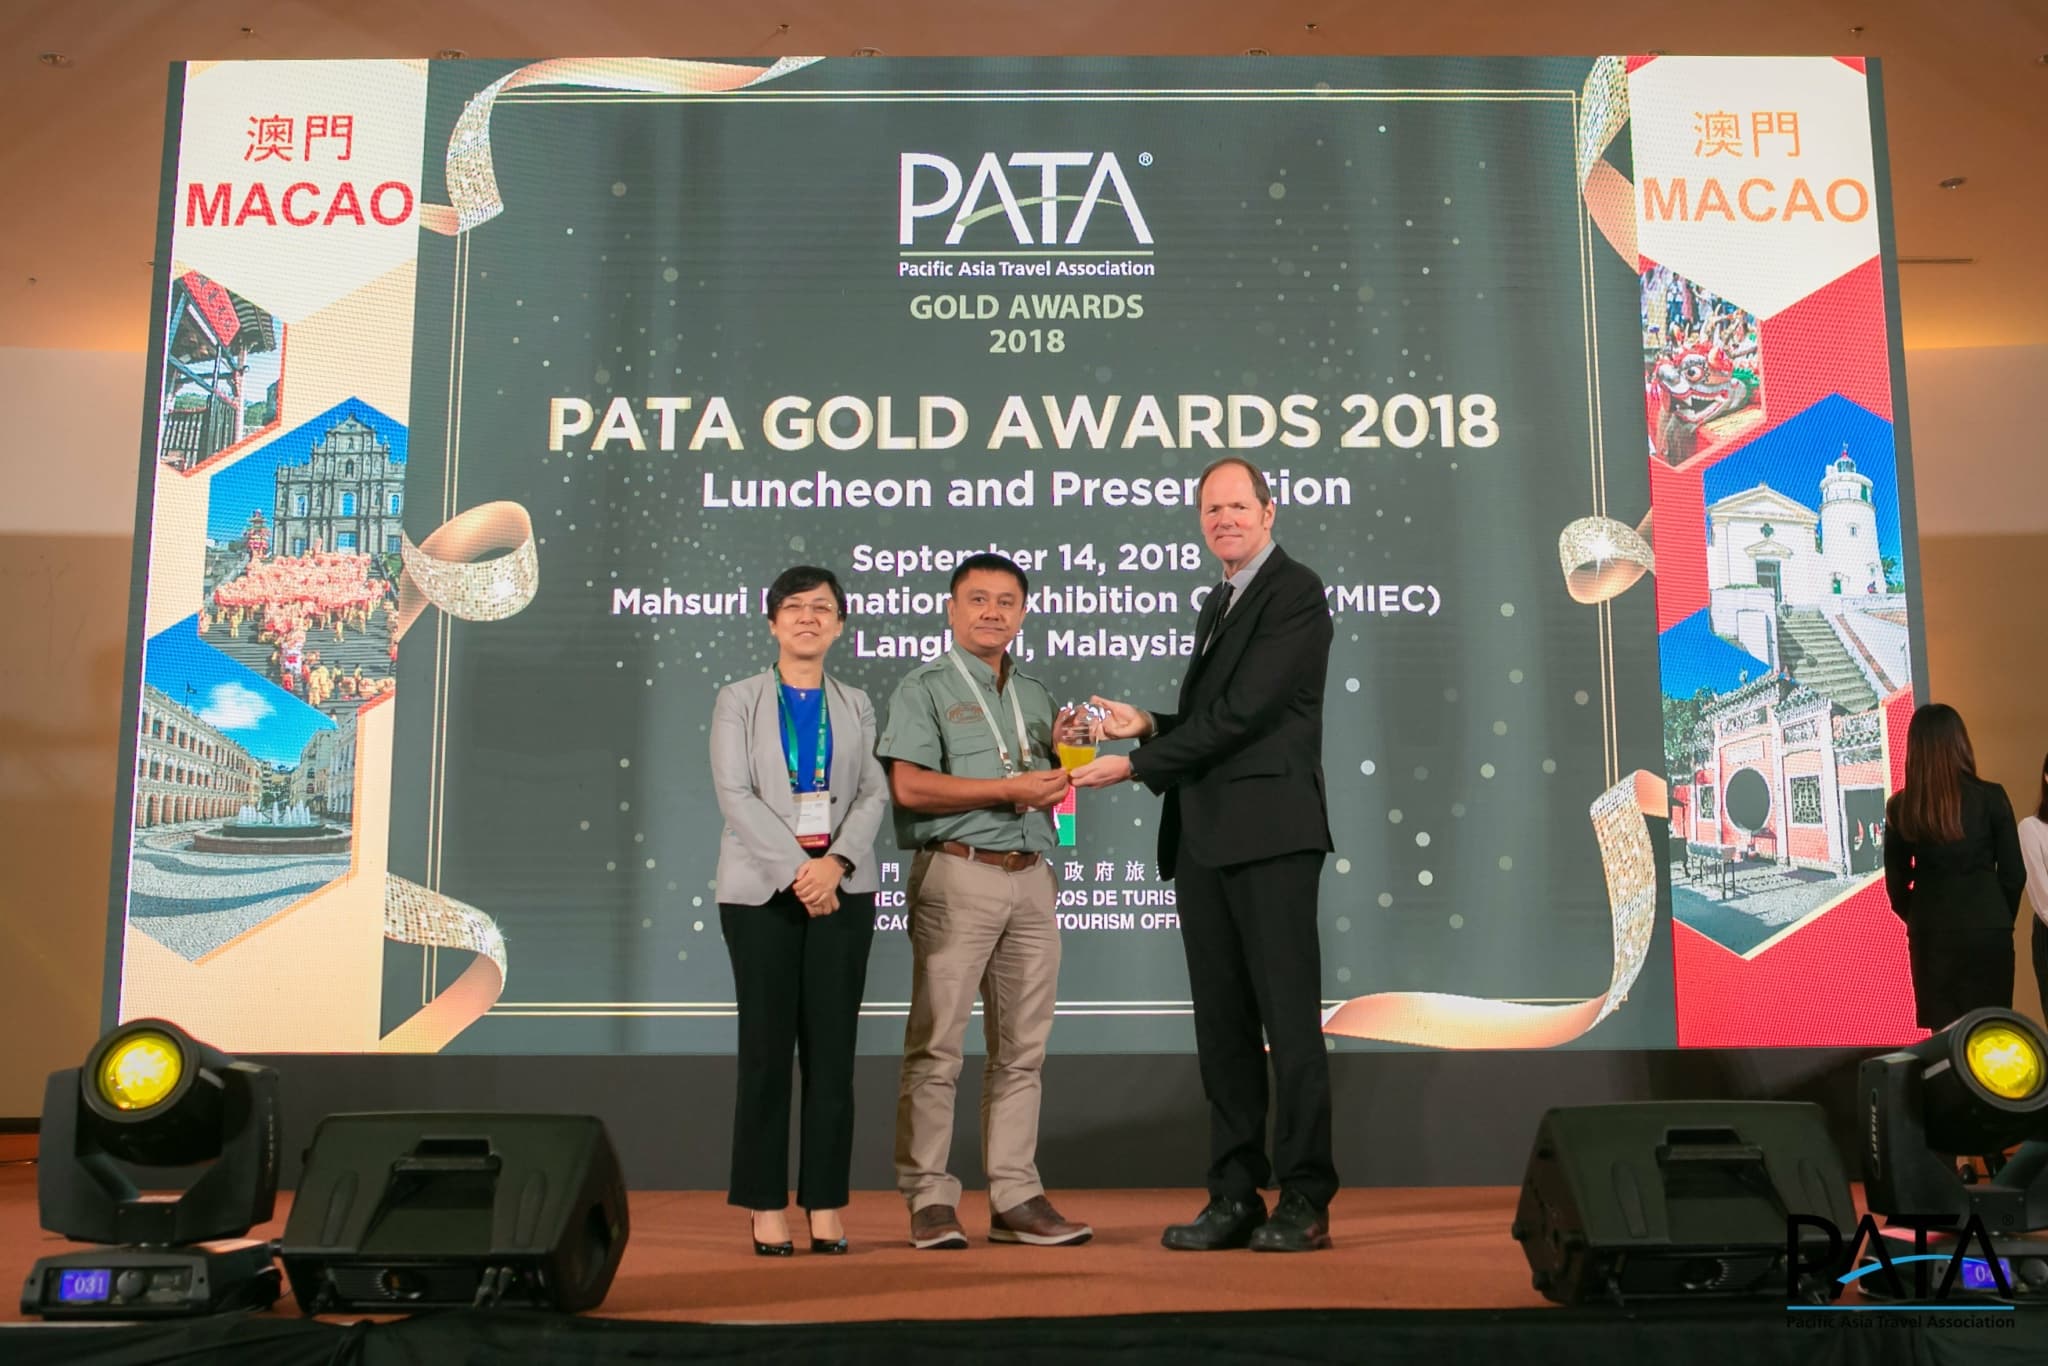 PATA Gold Awards 2018, under Environment category